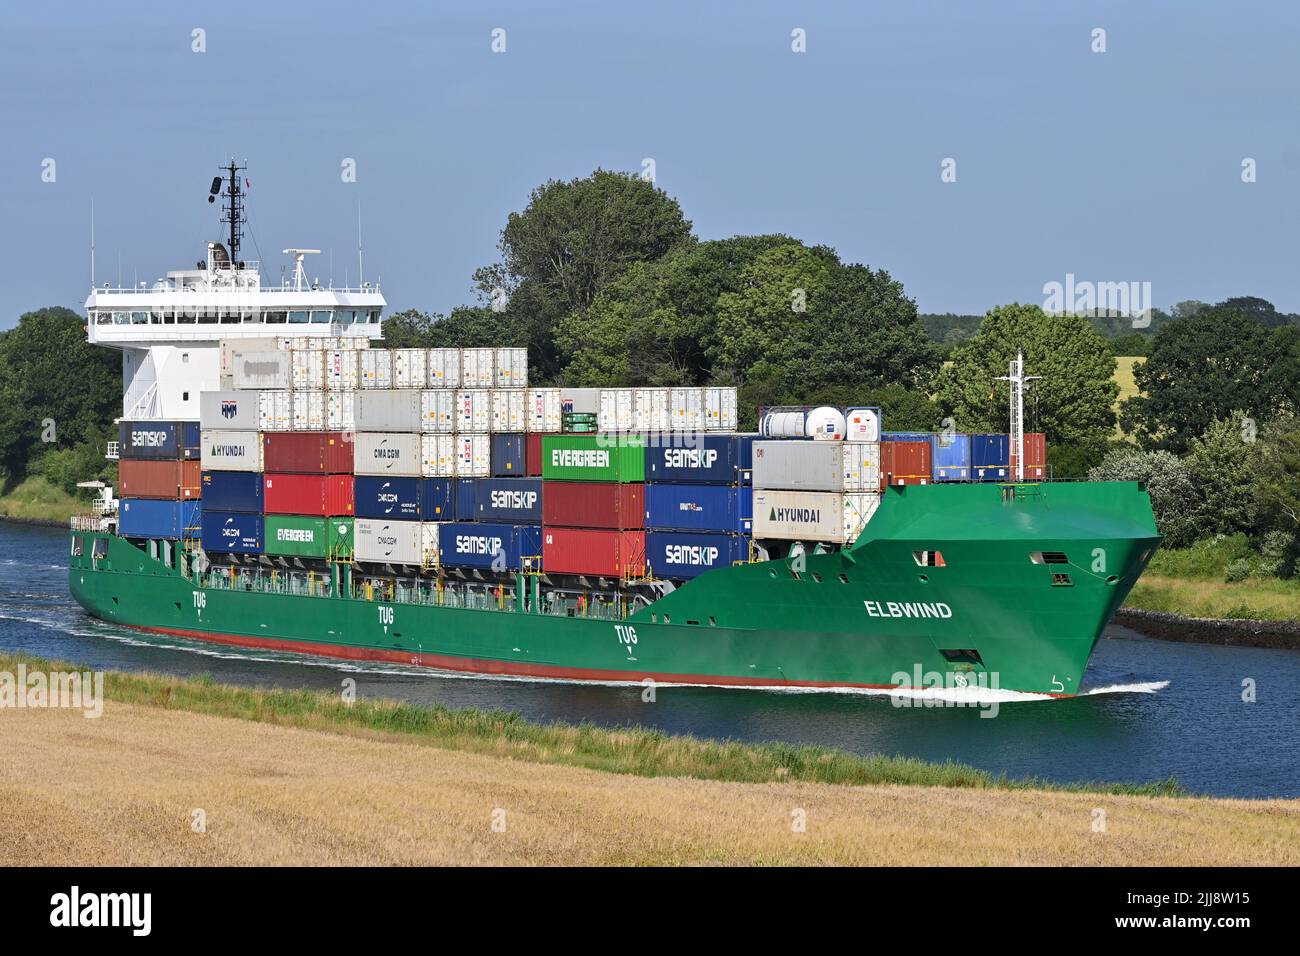 Containership ELBWIND passing the Kiel Canal Stock Photo